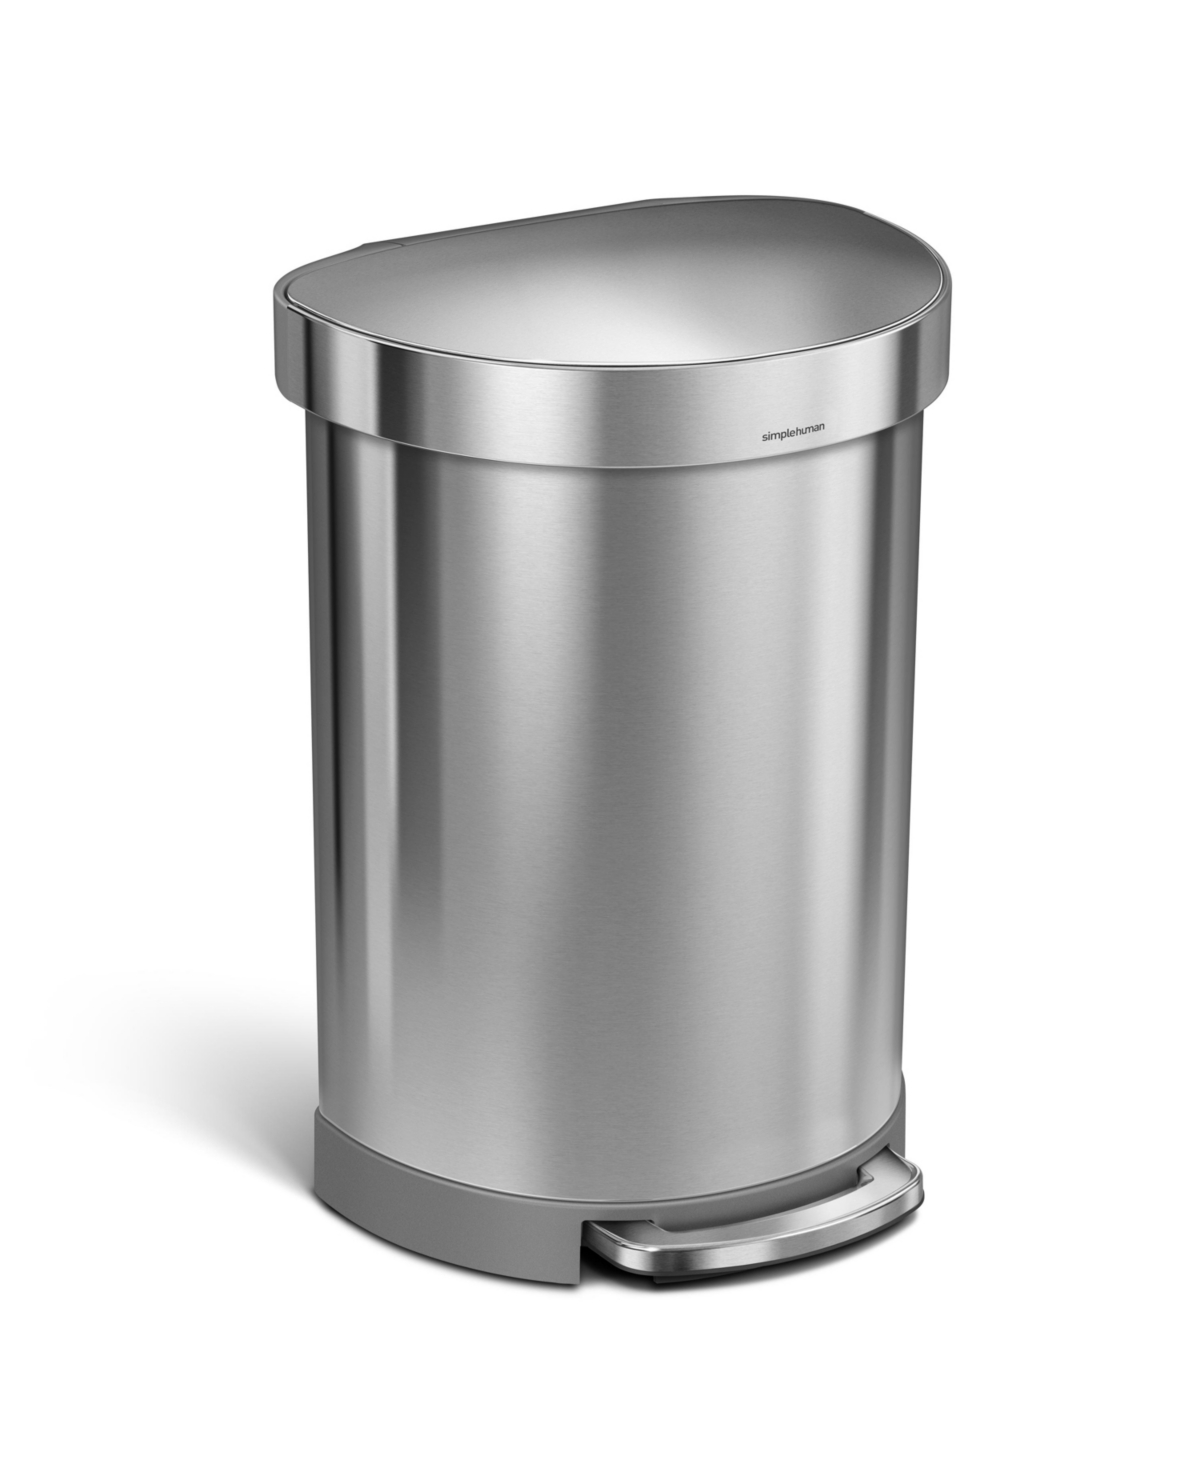 Semi-Round Step Trash Can, 60 Liters - Brushed Stainless Steel